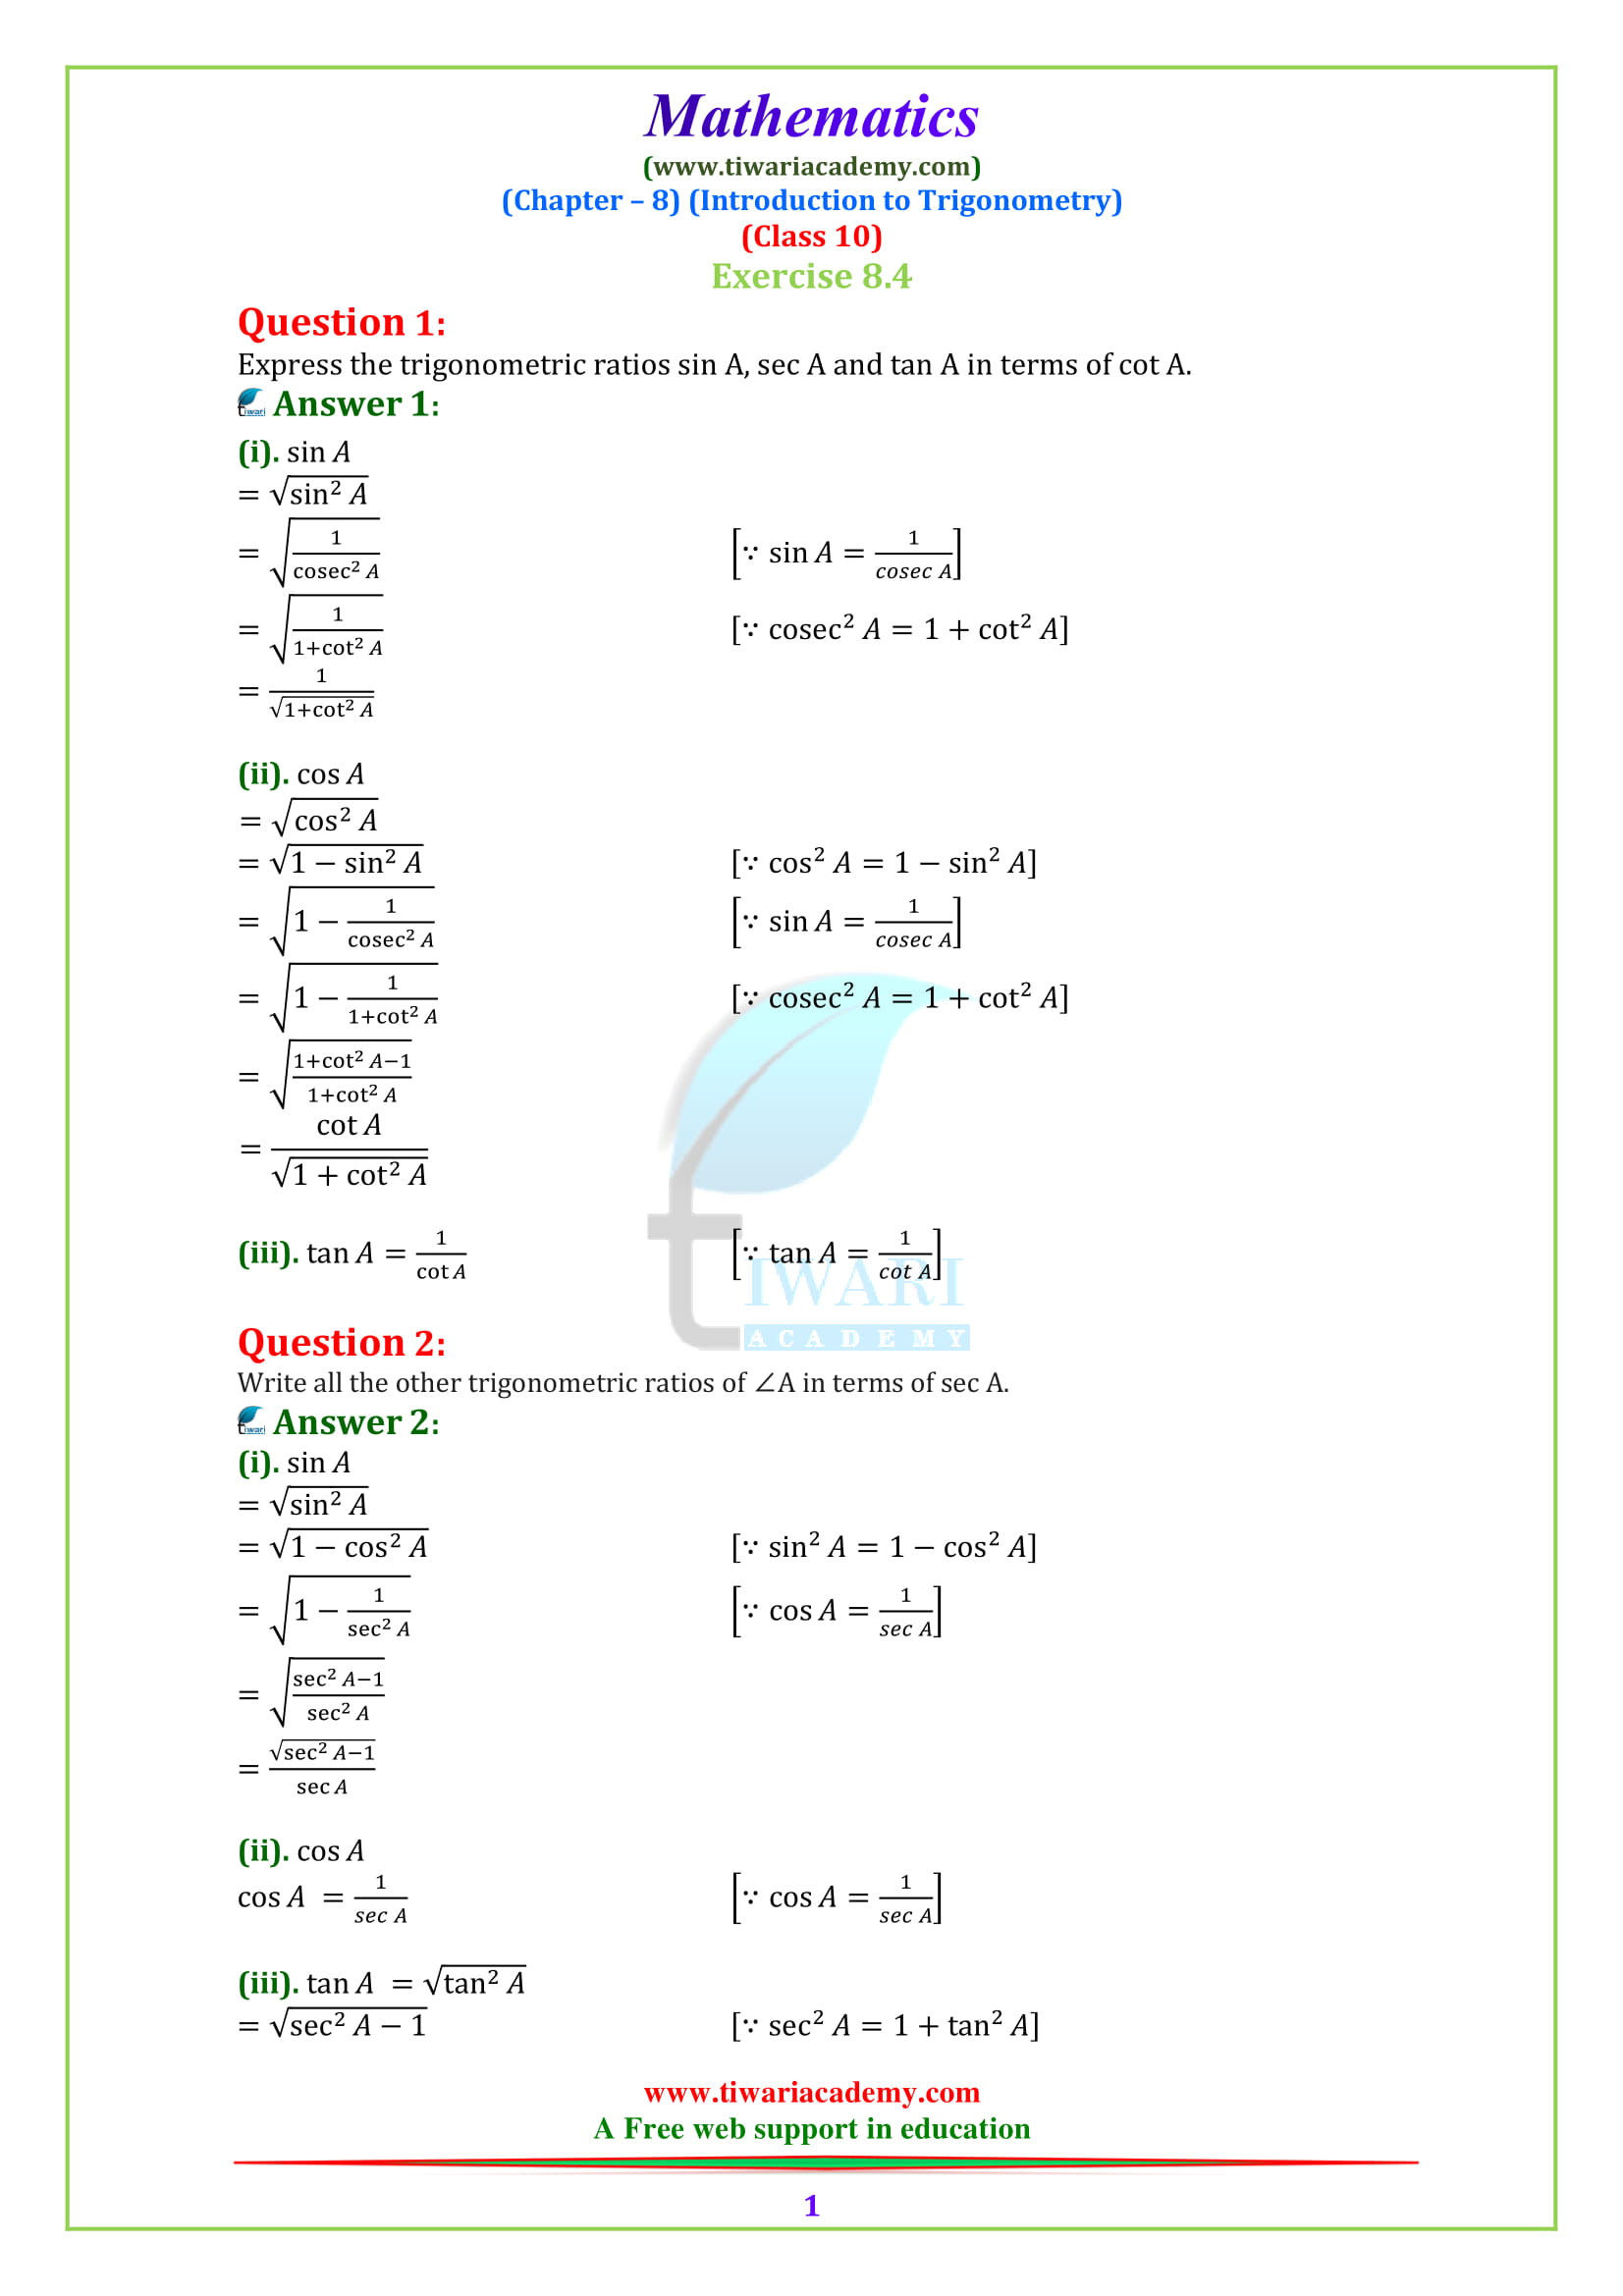 NCERT Solutions for class 10 Maths Chapter 8 Exercise 8.4